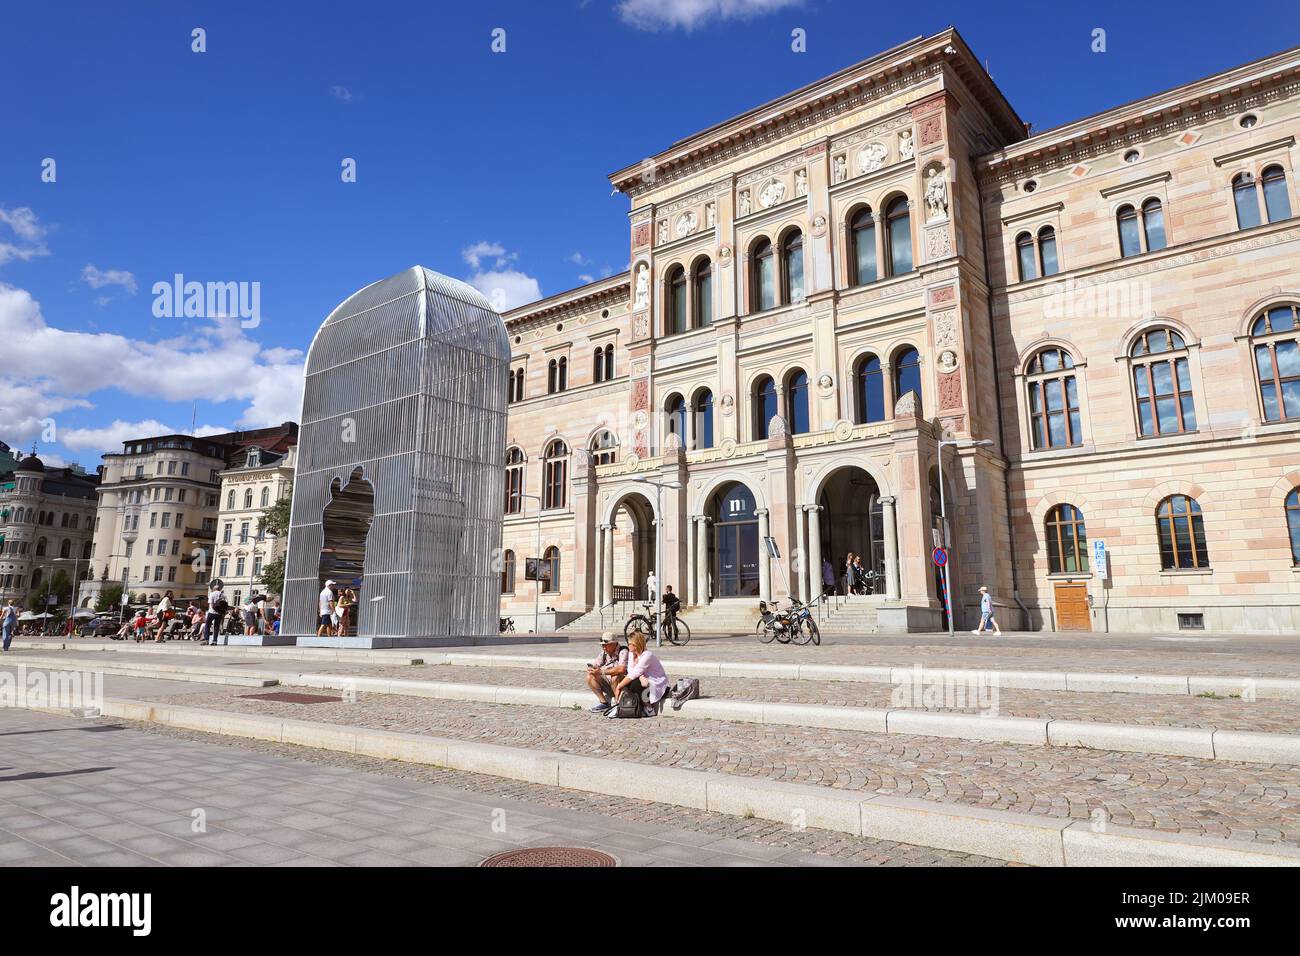 Stockholm Sweden, July 29, 2022: The National gallery exterior view. Stock Photo